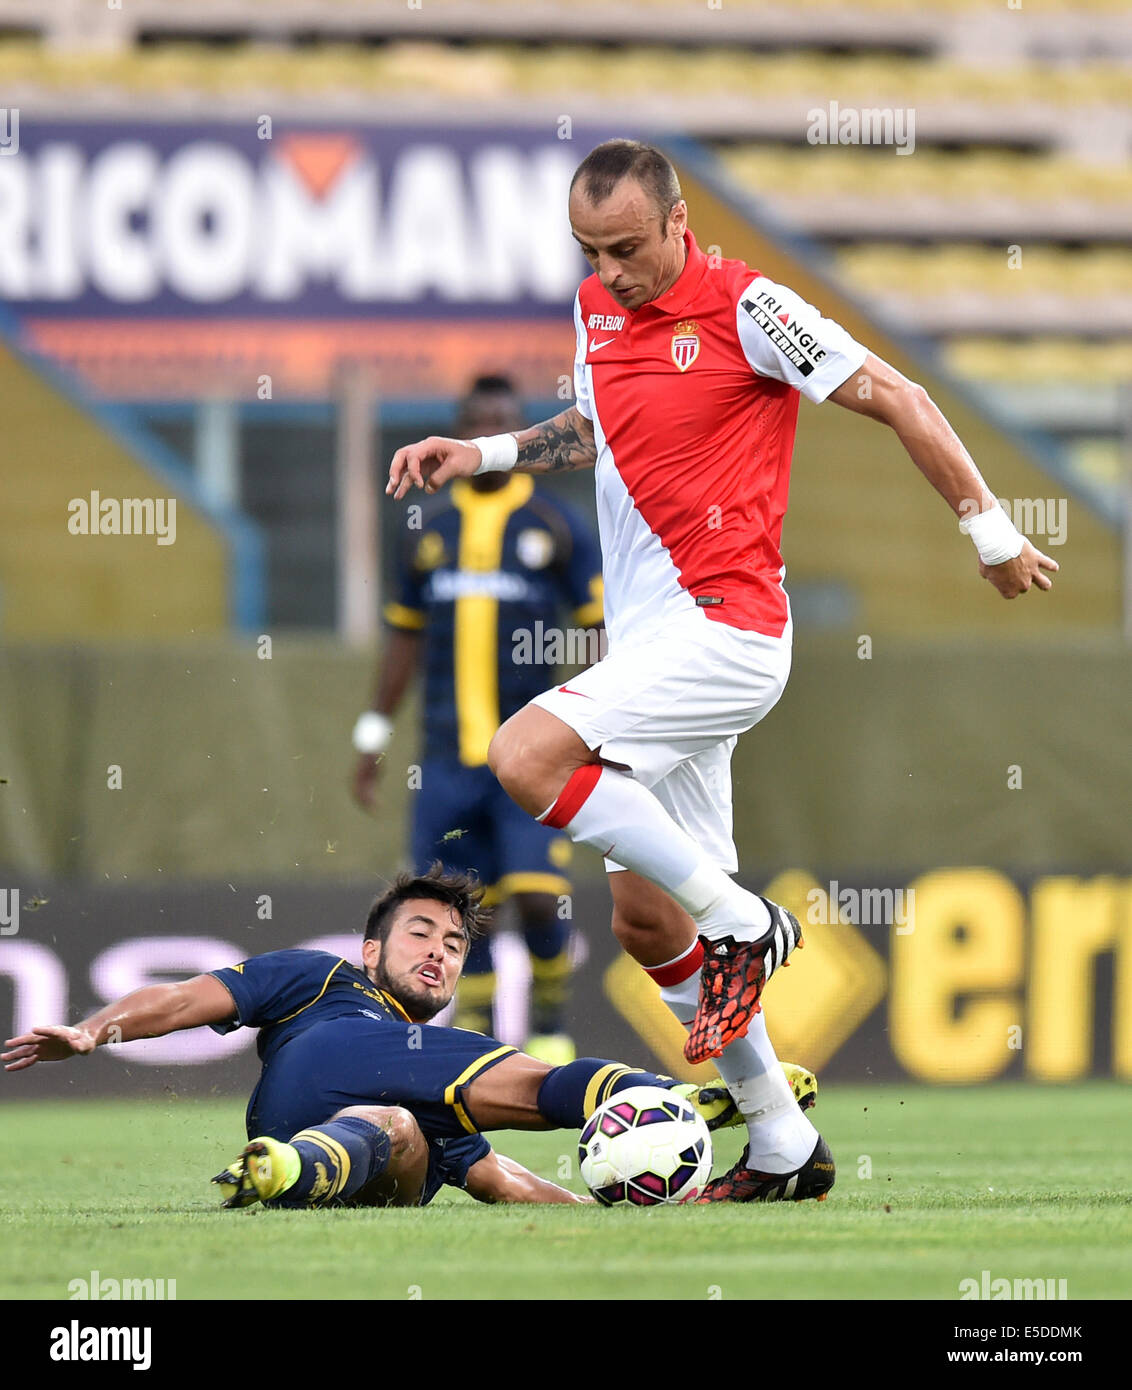 Parma, Italy. 28th July, 2014. Dimitar Berbatov (R) of AS Monaco vies with Cristobal Jorquera of FC Parma during a friendly match between AS Monaco and FC Parma in Parma, Italy, July 28, 2014. AS Monaco won 2-0. © Alberto Lingria/Xinhua/Alamy Live News Stock Photo